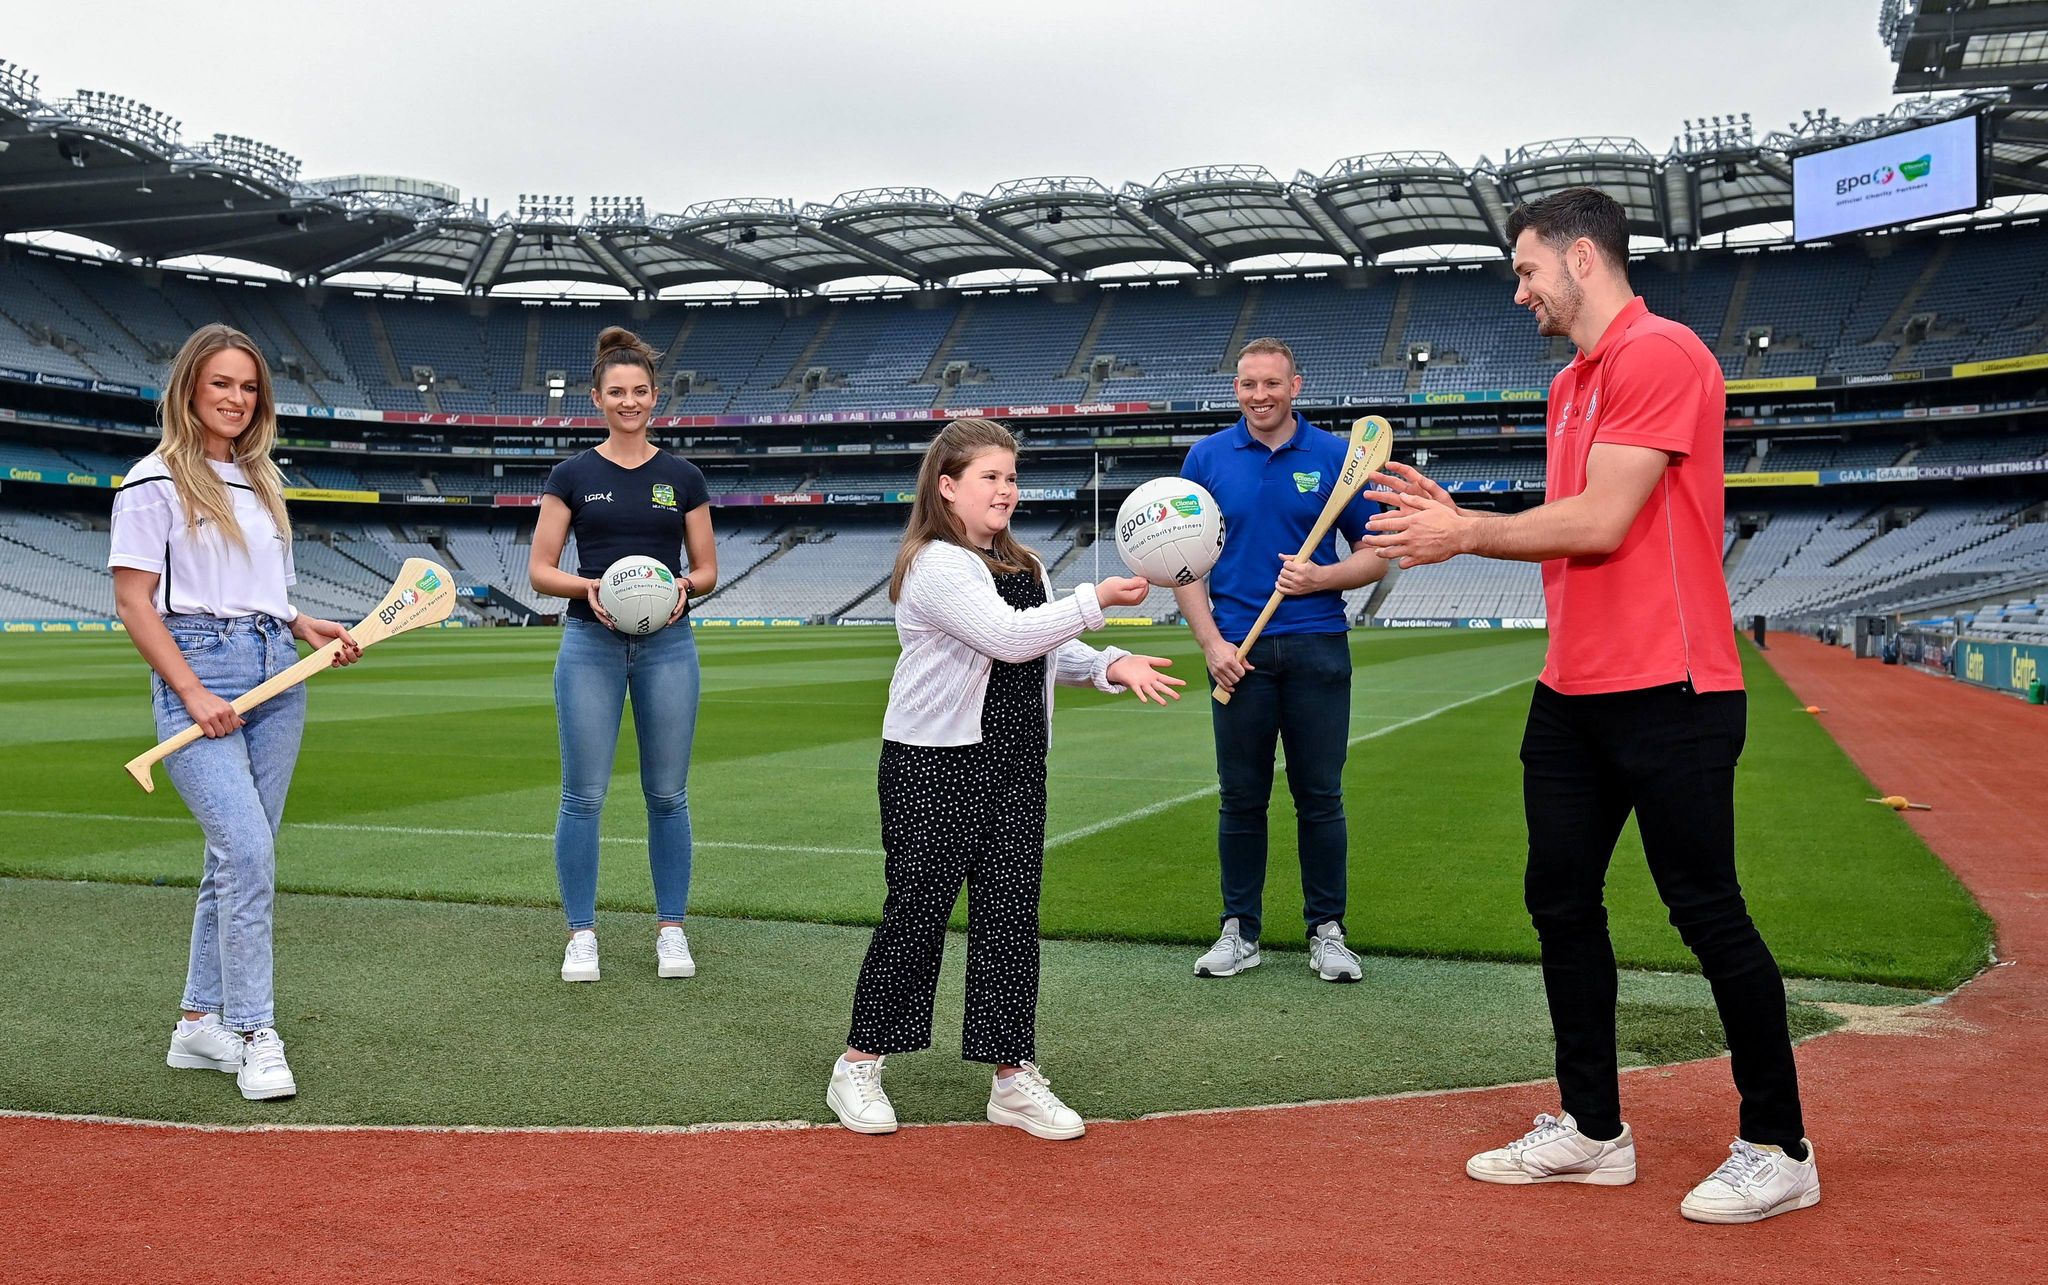 Clionas Foundation Gaelic Players Association - Pictured above at the launch of the Clionas Foundation Gaelic Players Association partnership is Galway’s Lorraine Ryan, Meath’s Máire O’Shaughnessy, Tyrone’s Conor McKenna, Limerick’s Shane Dowling, and Olivia Aherne who has been supported by Cliona’s.